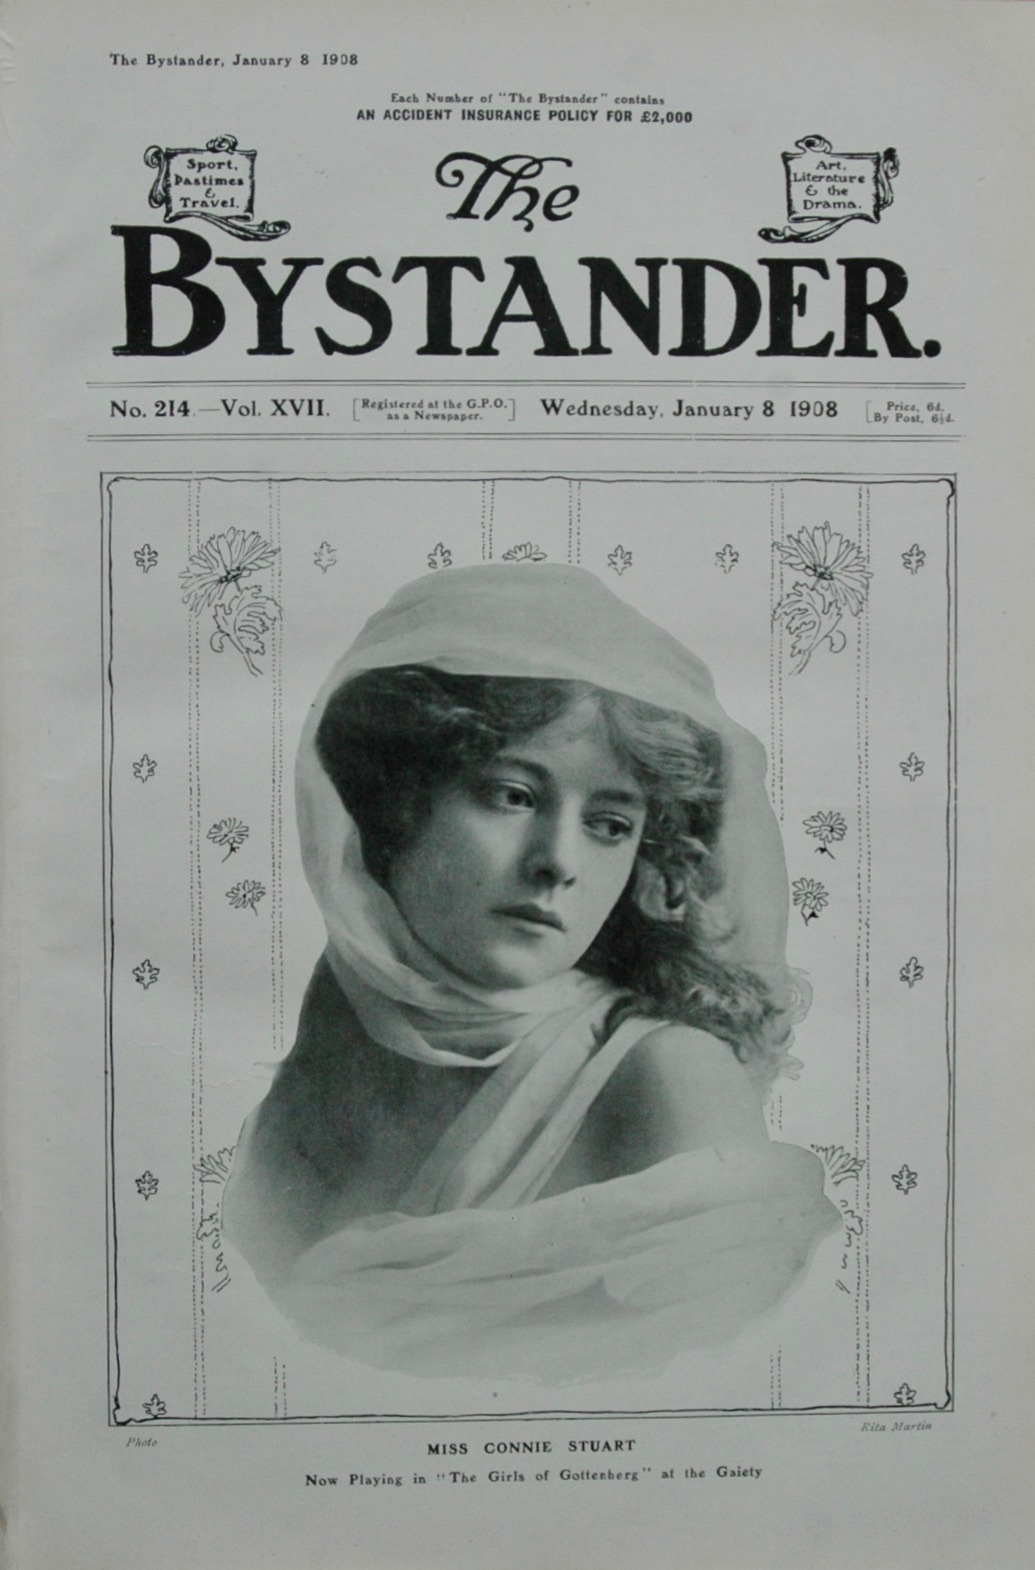 The Bystander - January 8, 1908